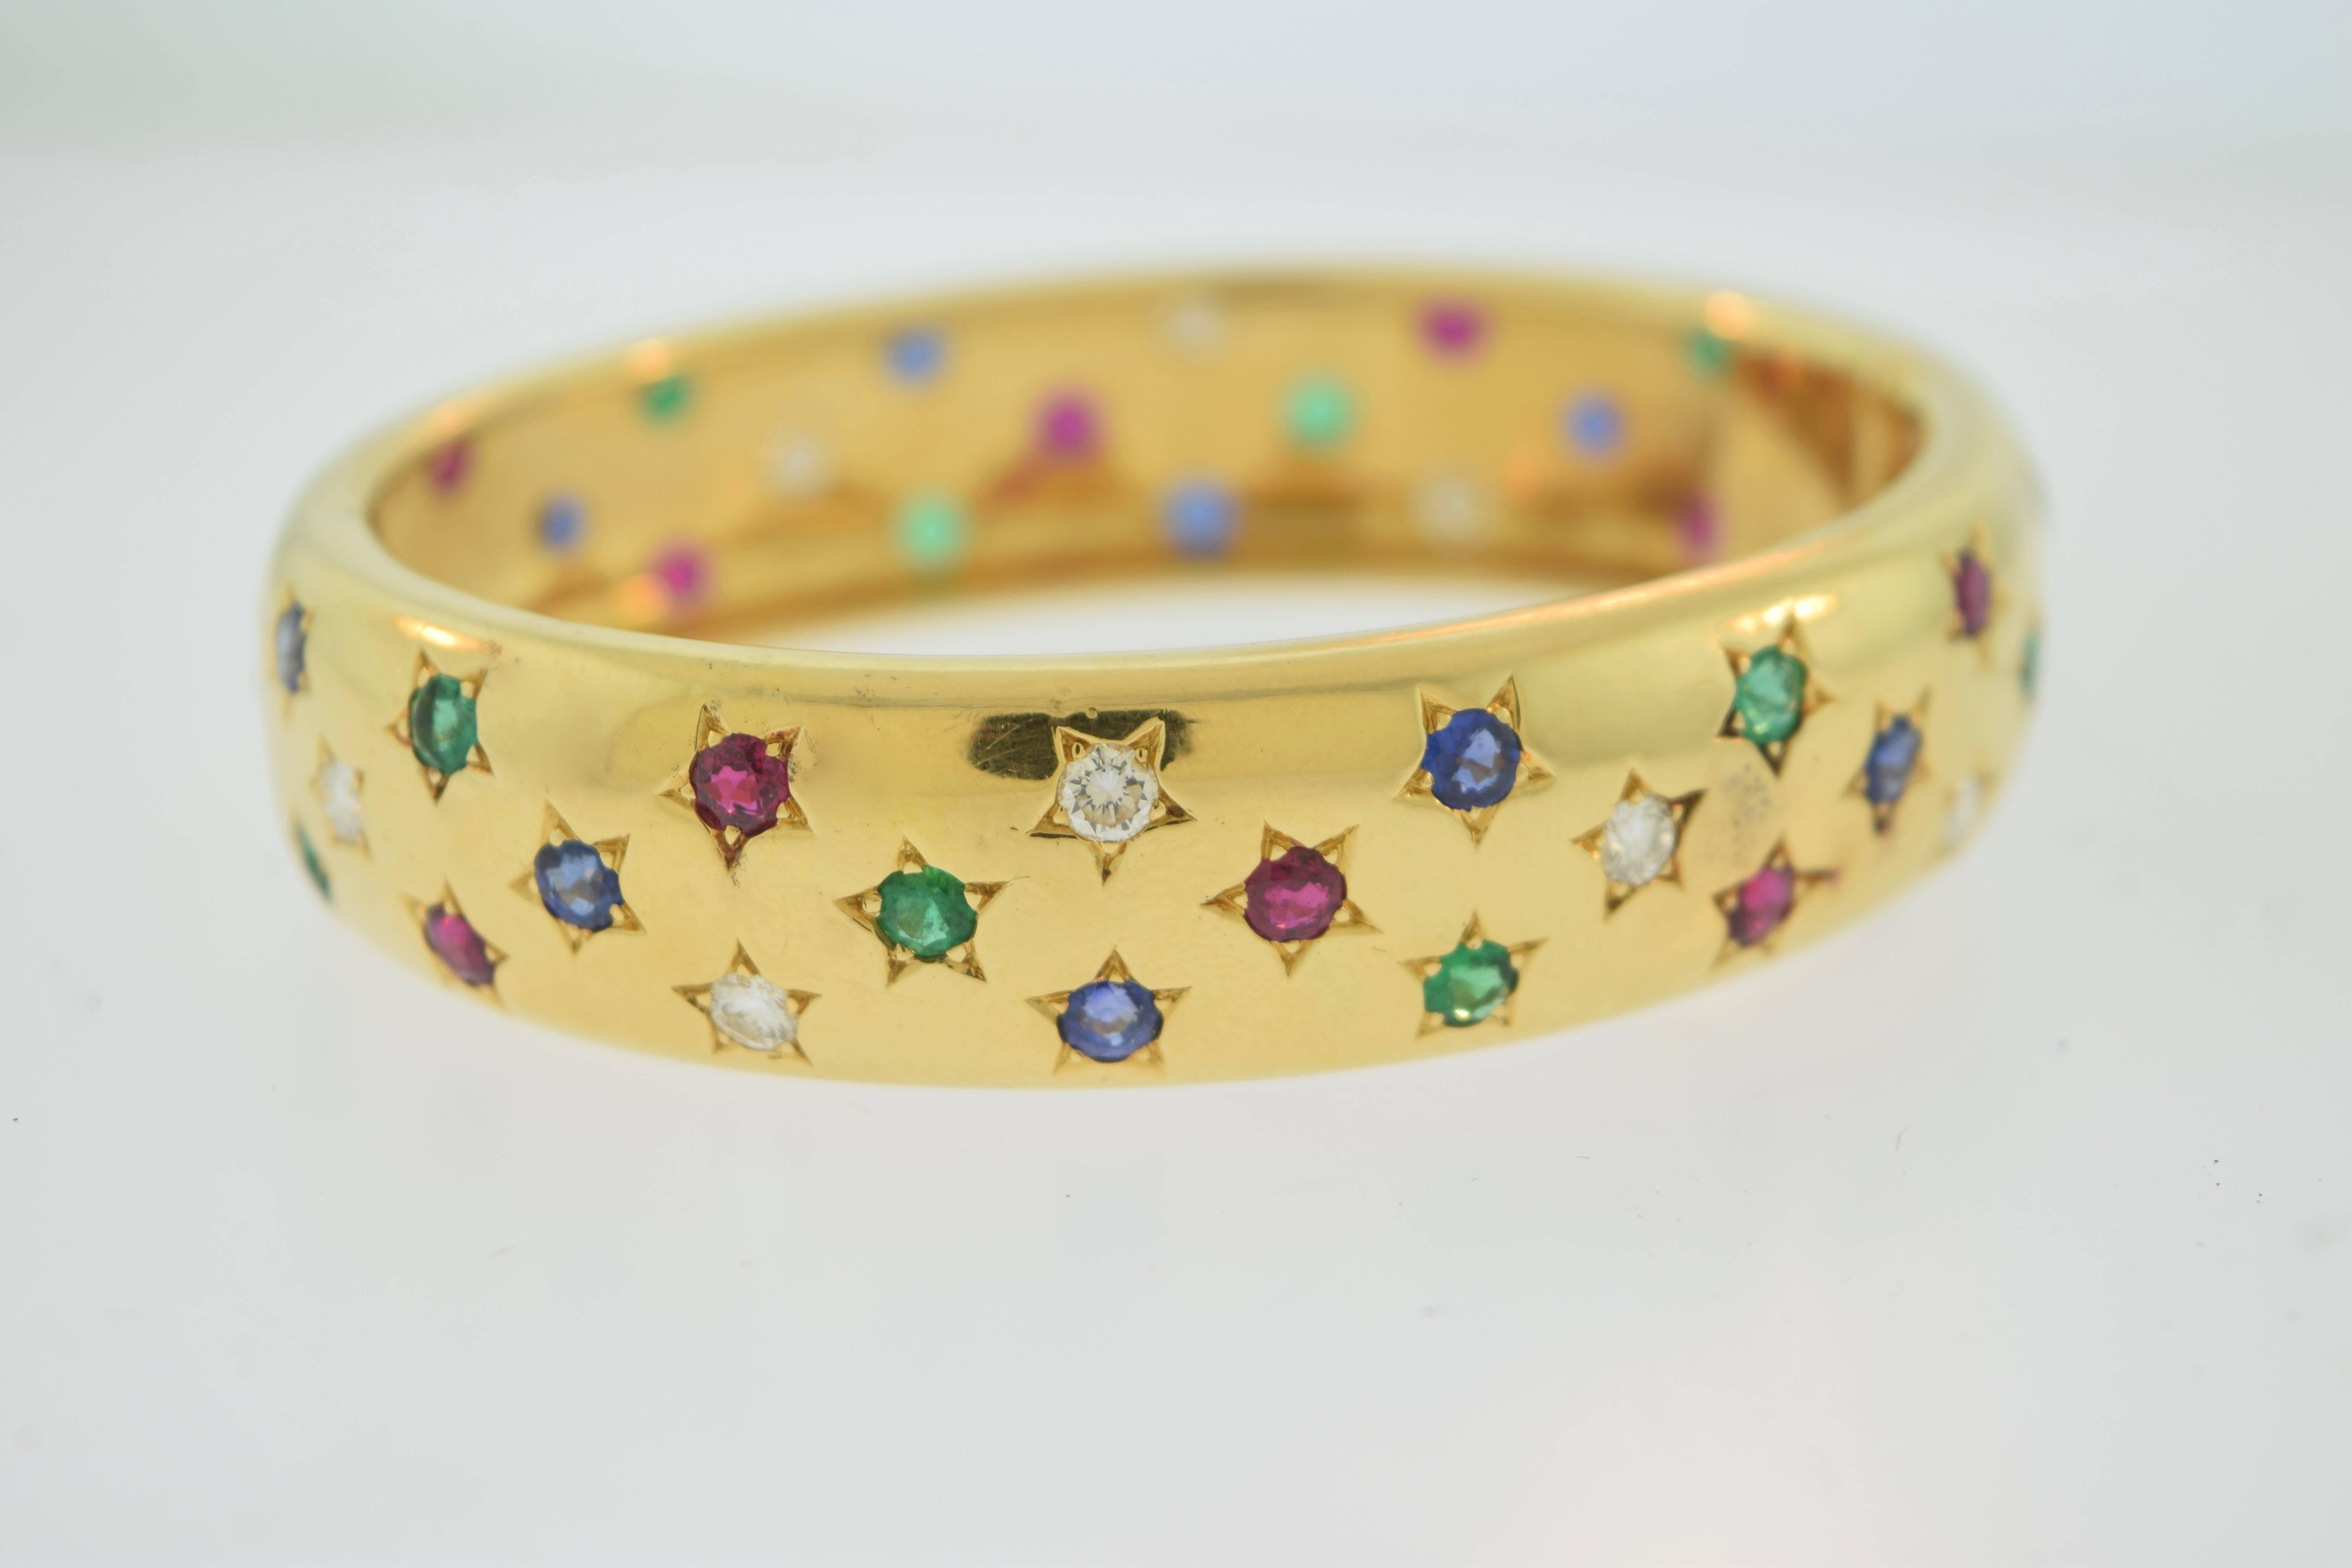 Cartier Vintage Star Gold Bangle

Elegant, modern, vintage, & 100% authentic Cartier bangle, with magnificent diamonds, sapphires, rubies, and emeralds, encrusted in stars along the beautiful bracelet. This item was sold in 1995 at the Cartier